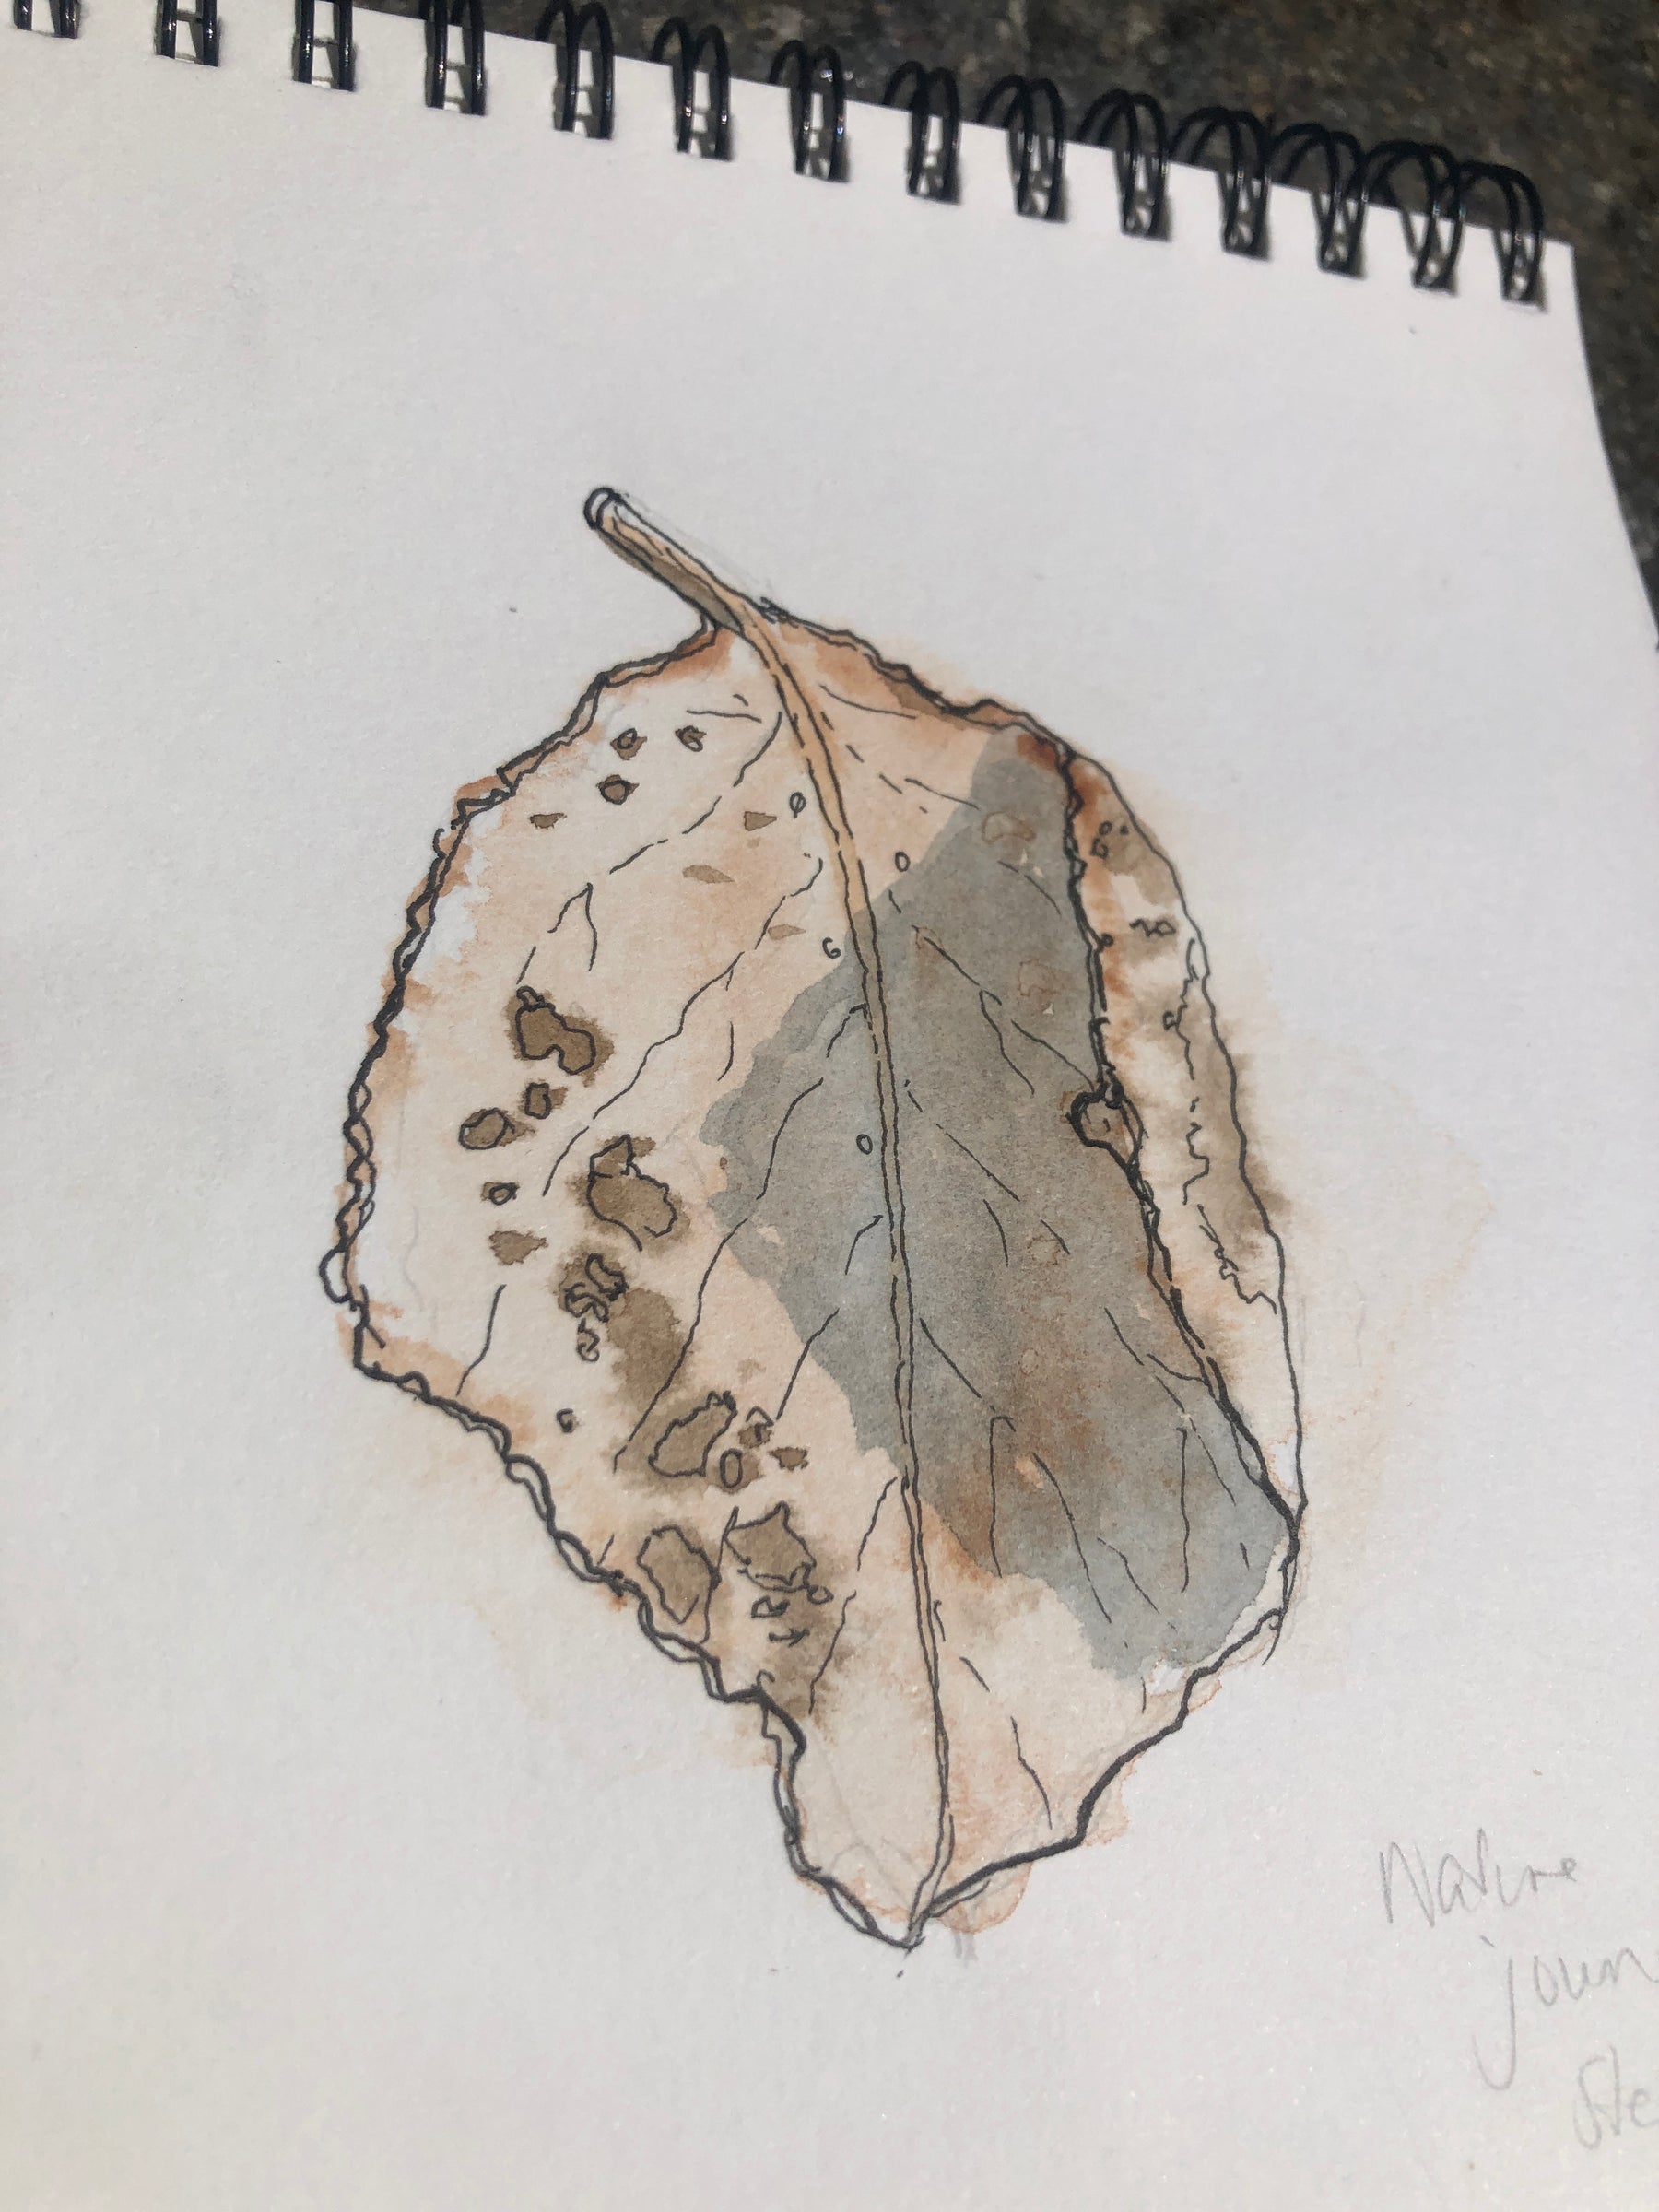 nature journaling of a leaf